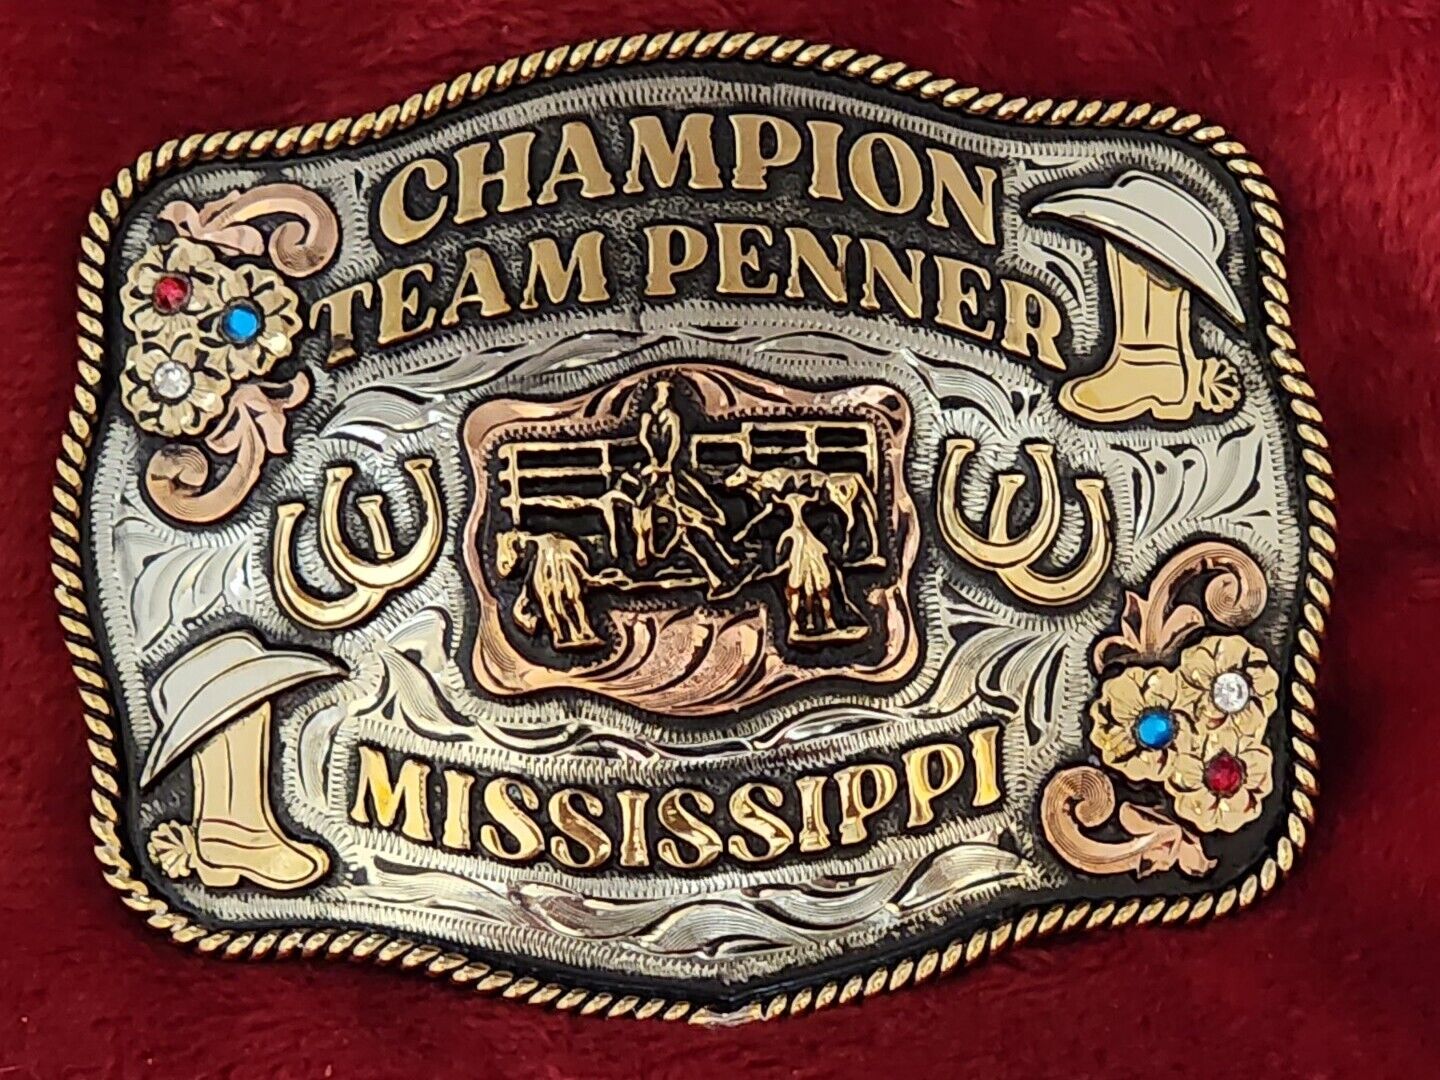 CHAMPION TROPHY BUCKLE PROFESSIONAL RODEO☆ TEAM PENNING☆MISSISSIPPI☆RARE☆515